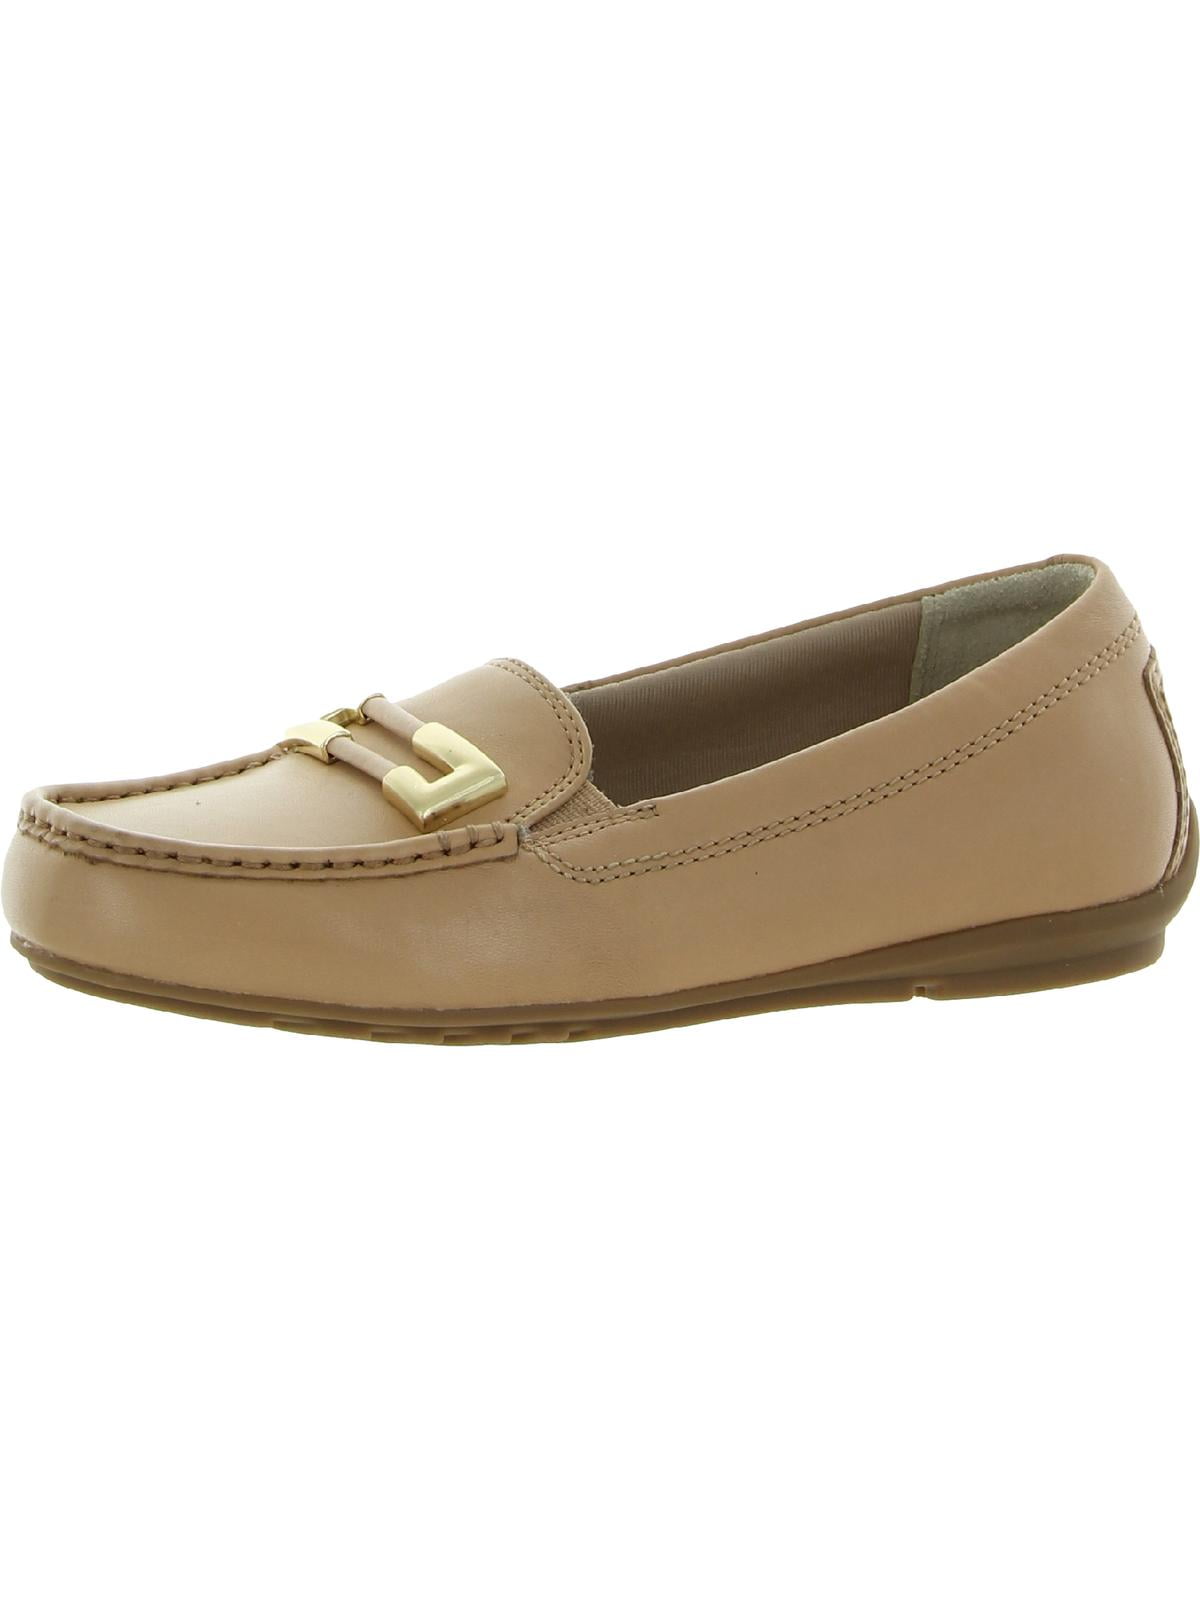 Rockport Womens TMD New Ornament Faux Leather Slip On Loafers - Walmart.com